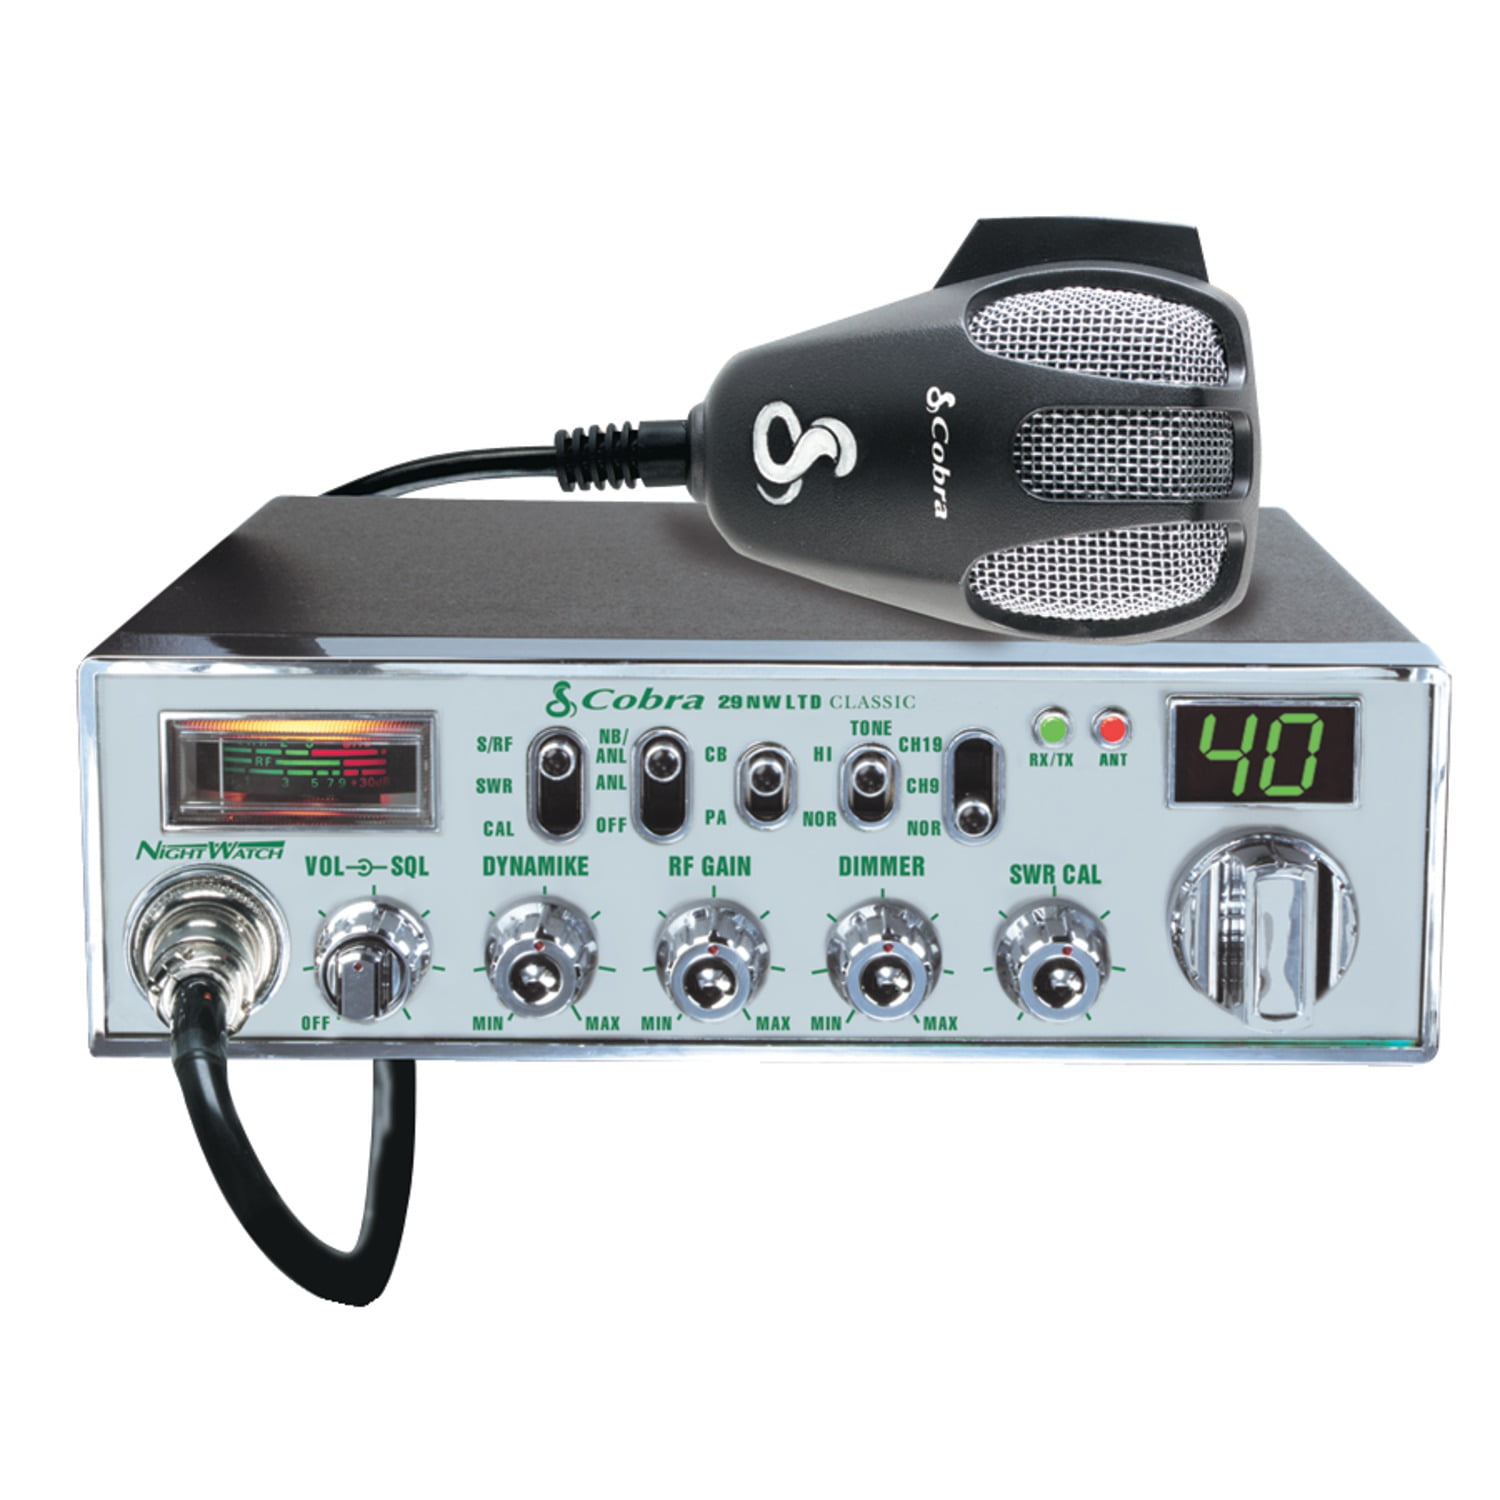 Cobra 29NW Classic Professional CB Radio with Nightwatch Illuminated  Display - Emergency Radio, Instant Channel 9/19, 40 Channels, SWR  Calibration &